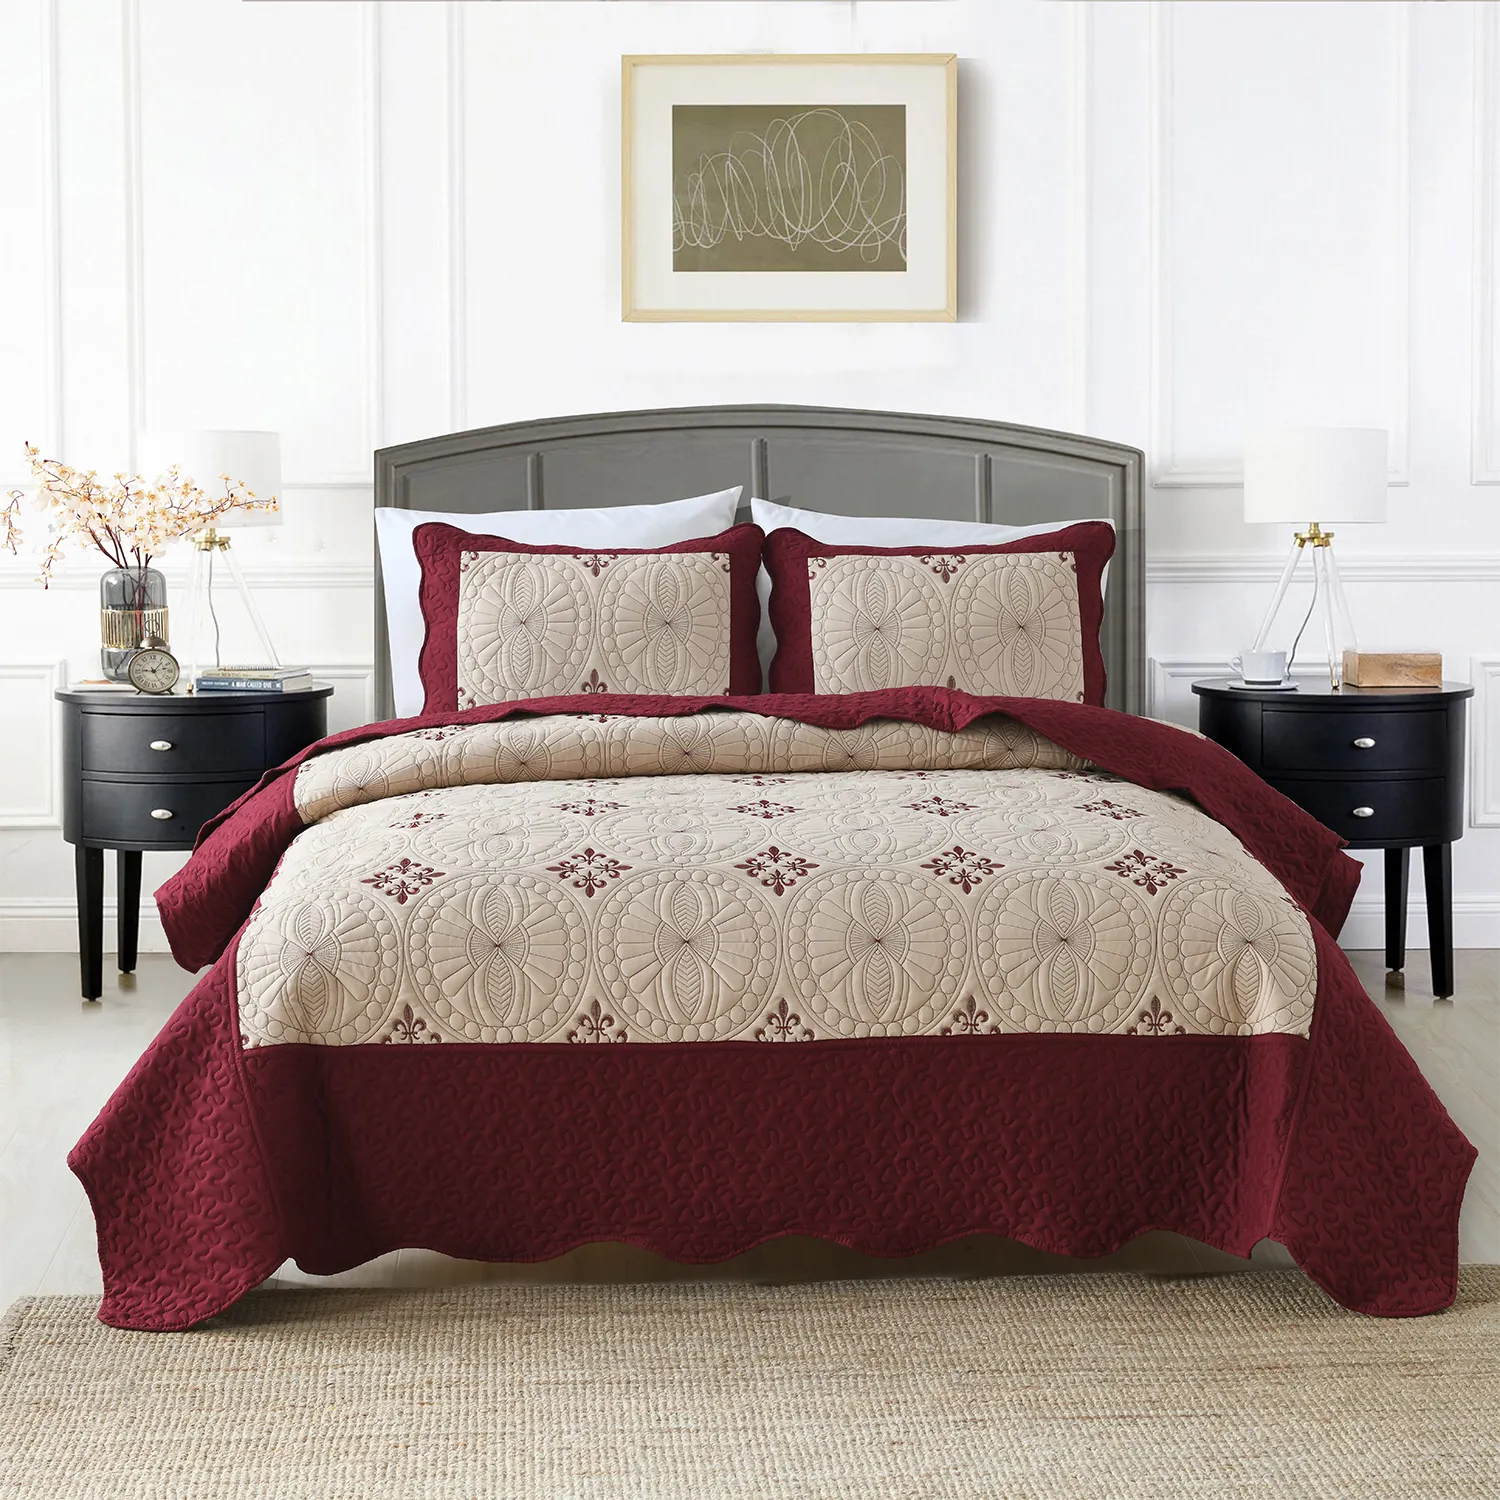 Festival New Style Embroidered Bed Cover 3pcs Set Exquisite Decorative Quilt Set